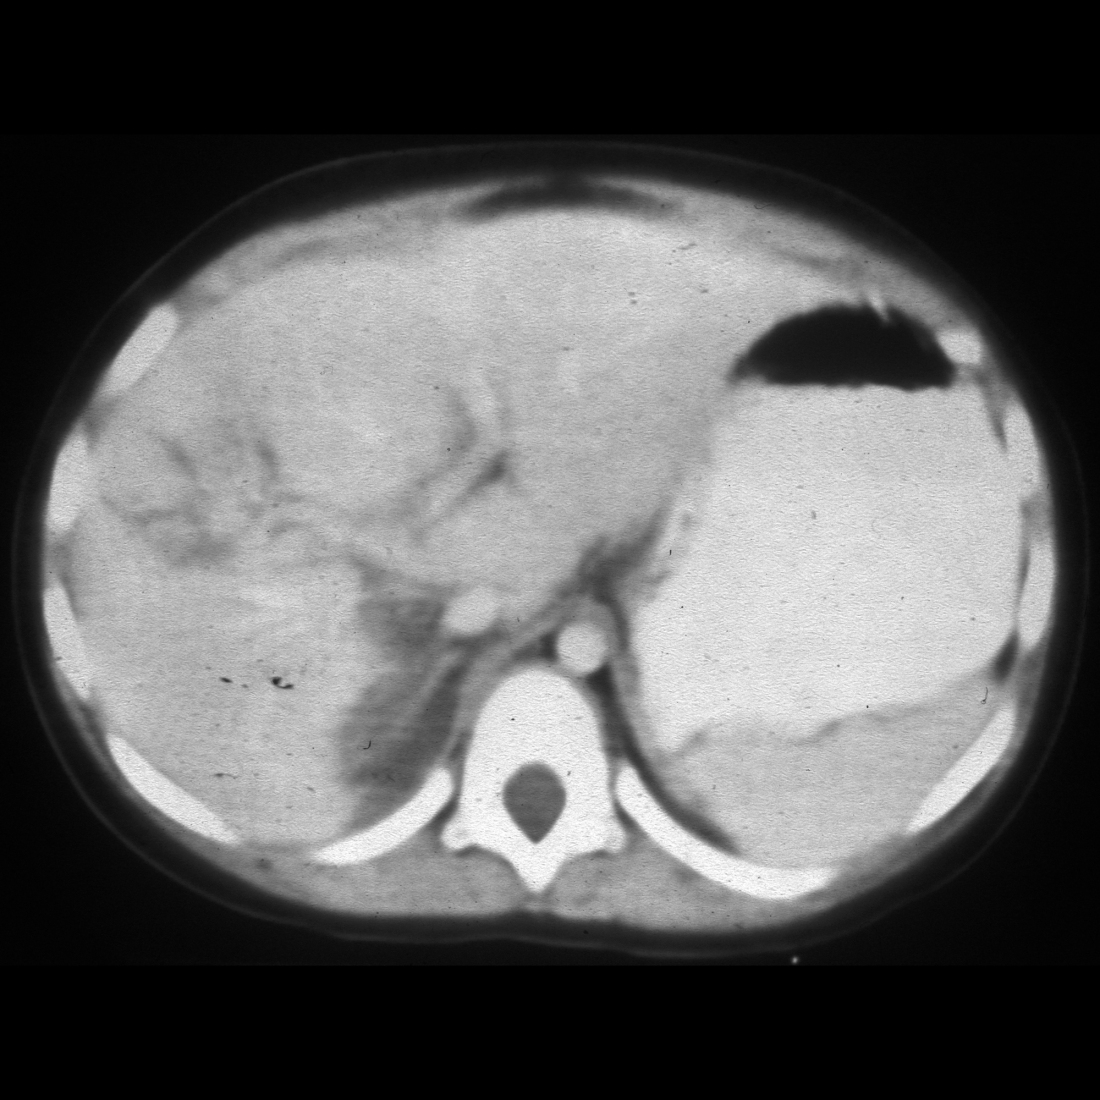 CT of liver laceration and adrenal hemorrhage